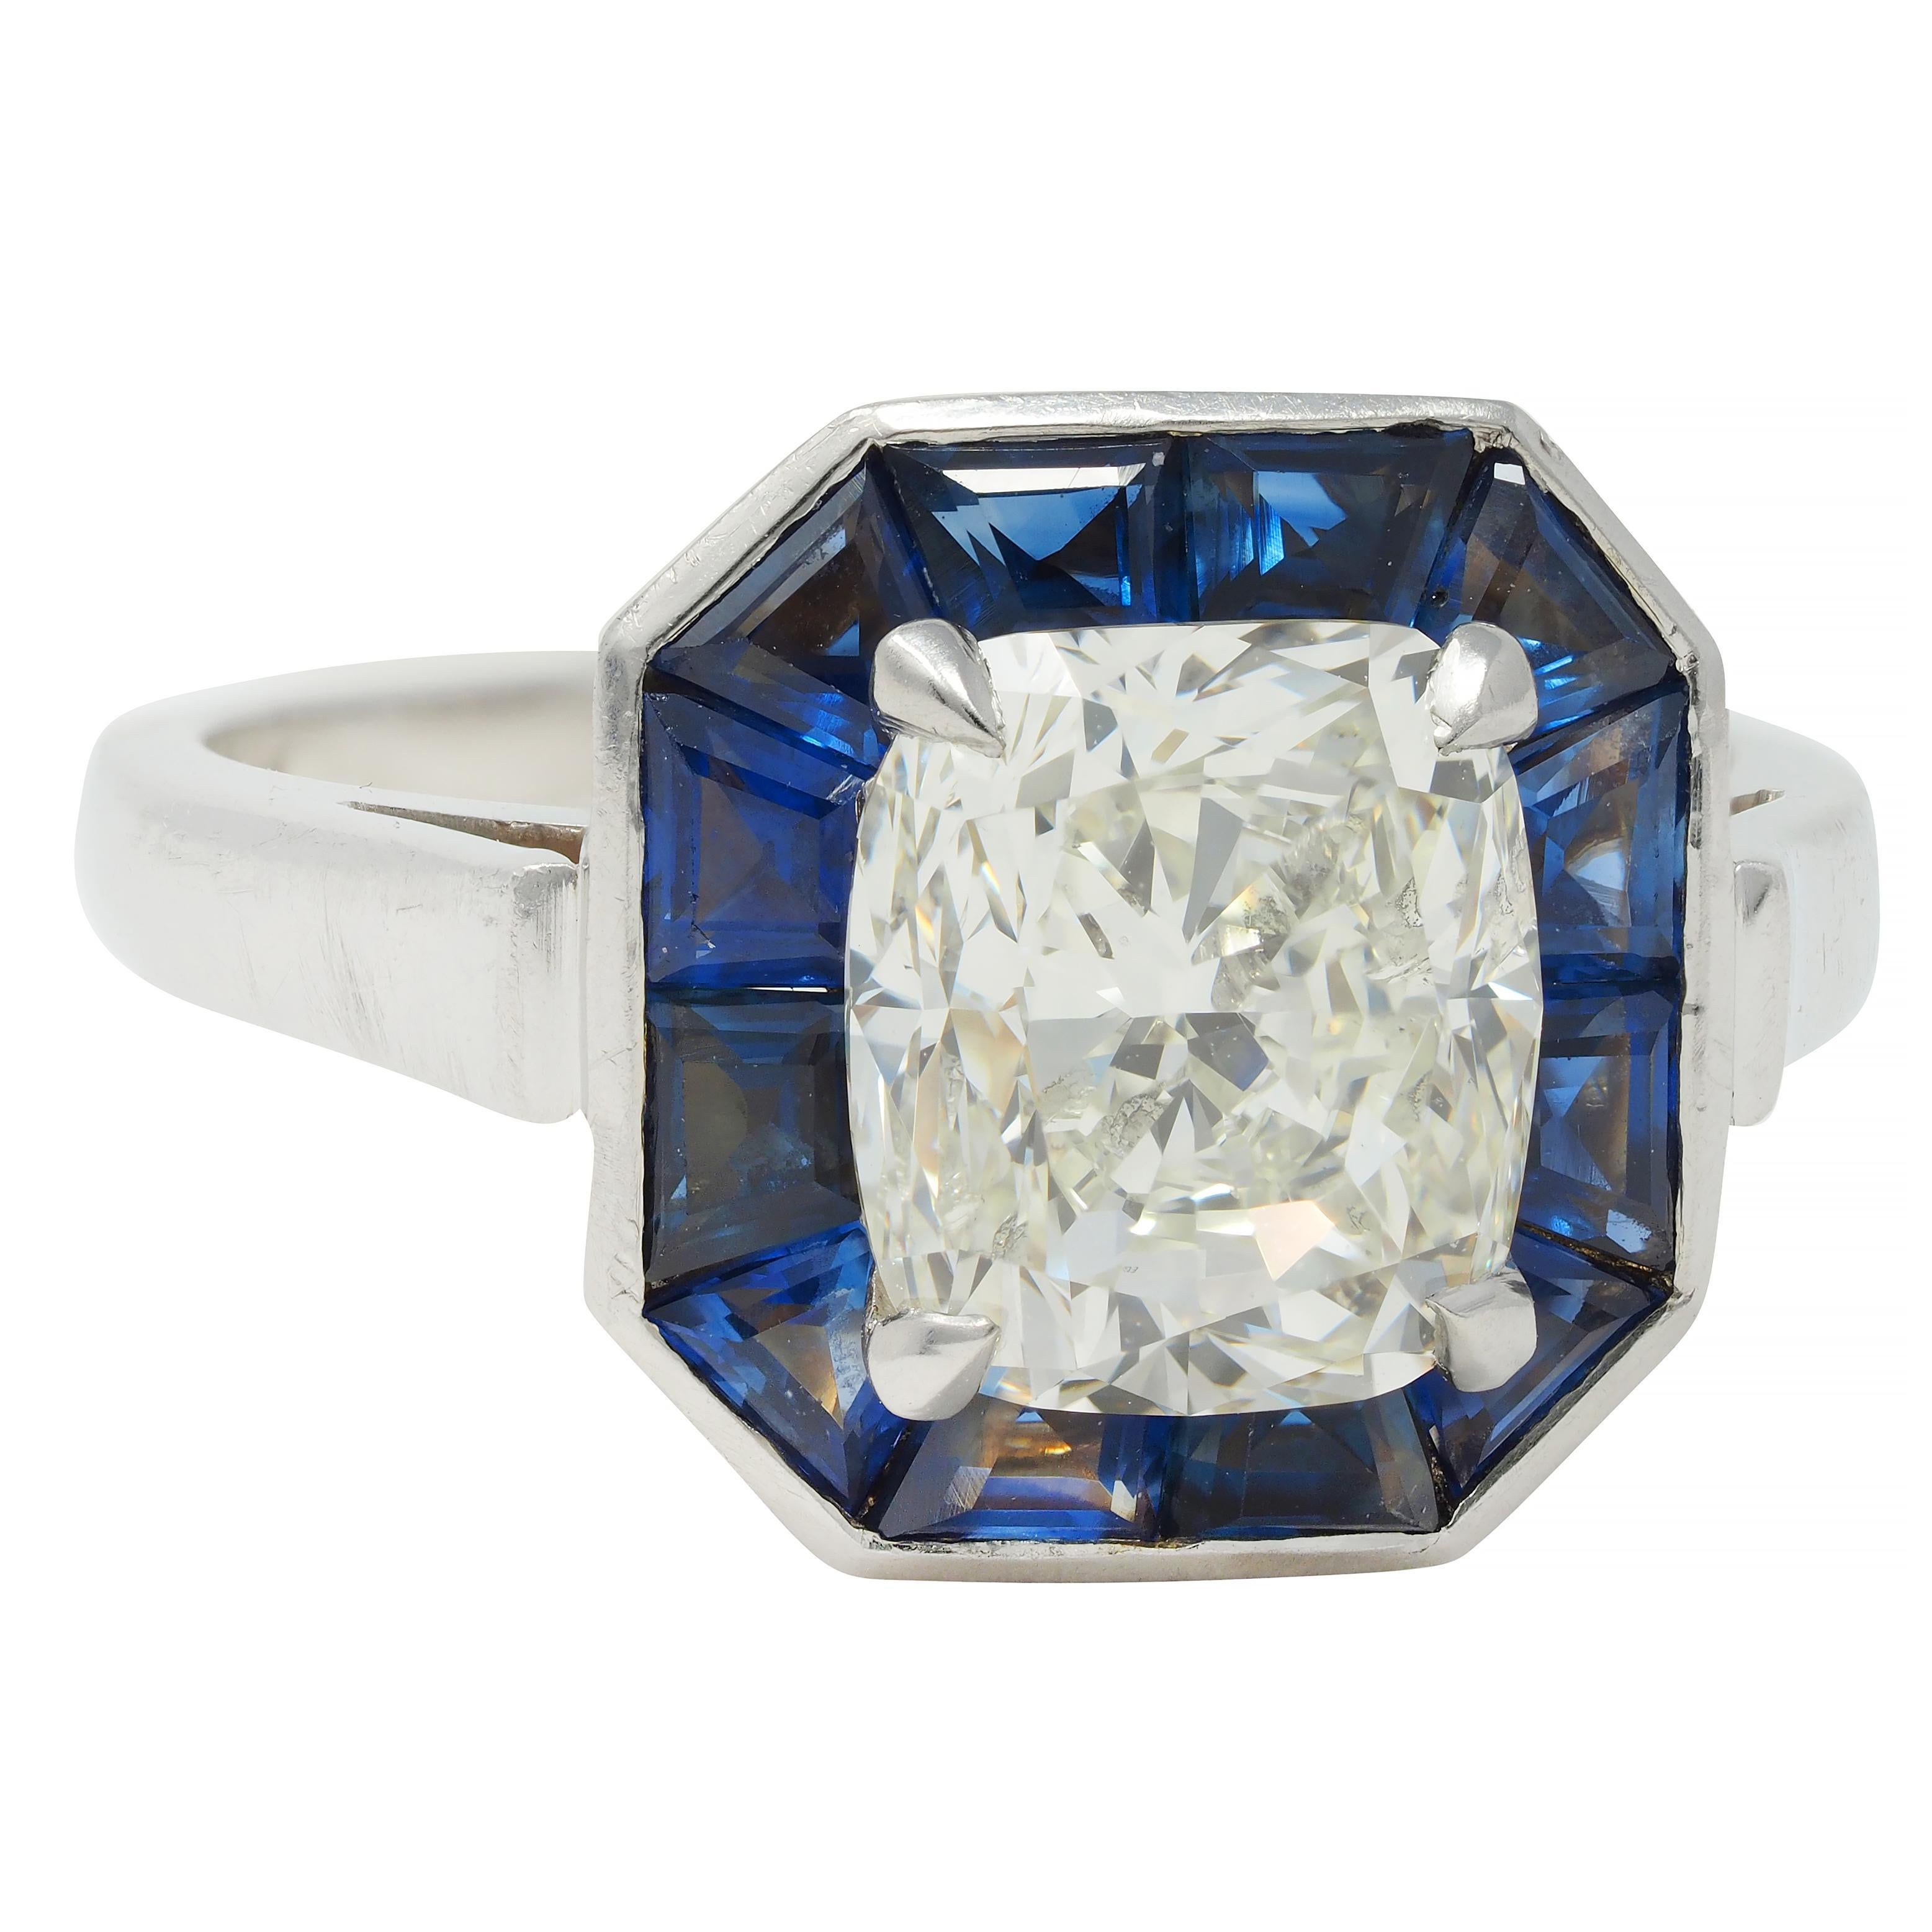 Centering an elongated cushion cut diamond weighing 2.81 carats total - L color with I1 clarity
Prong set with a recessed channel set halo surround of calibré cut sapphires 
Weighing approximately 2.16 carats total - transparent medium blue 
With a